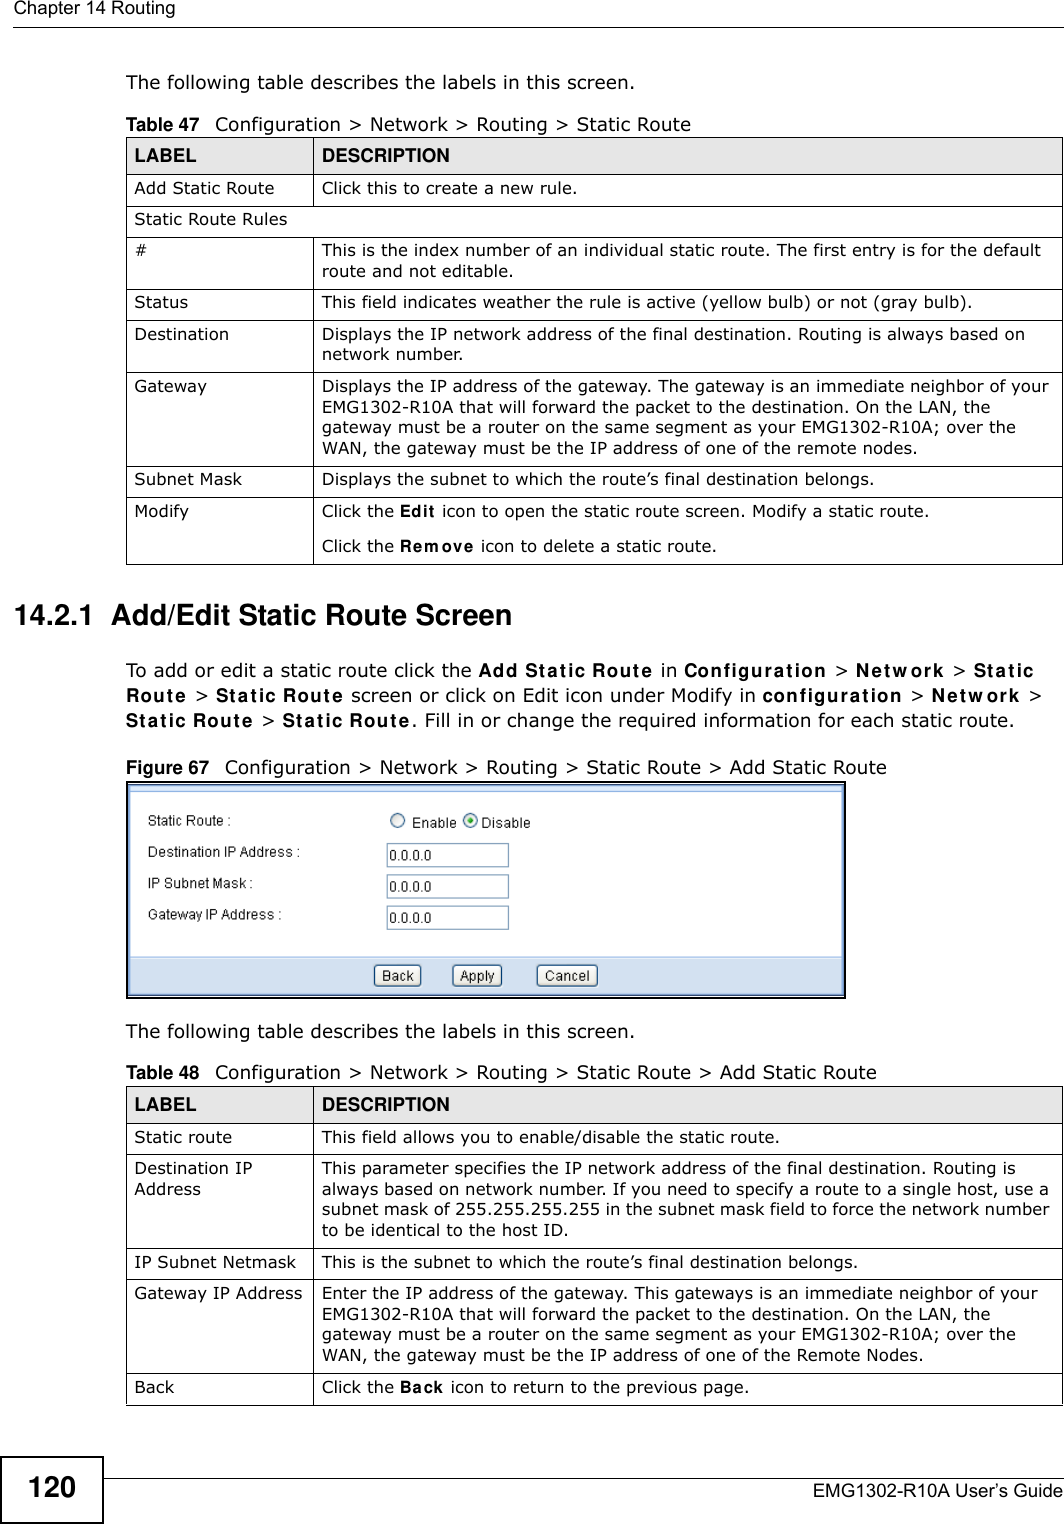 Chapter 14 RoutingEMG1302-R10A User’s Guide120The following table describes the labels in this screen.14.2.1  Add/Edit Static Route ScreenTo add or edit a static route click the Add Sta t ic Route  in Configura t ion &gt; N e t w or k  &gt; St a t ic Route &gt; Stat ic Route  screen or click on Edit icon under Modify in configurat ion &gt; N e t w or k &gt; Sta t ic Rout e &gt; St a tic Rout e . Fill in or change the required information for each static route.Figure 67   Configuration &gt; Network &gt; Routing &gt; Static Route &gt; Add Static RouteThe following table describes the labels in this screen. Table 47   Configuration &gt; Network &gt; Routing &gt; Static RouteLABEL DESCRIPTIONAdd Static Route Click this to create a new rule.Static Route Rules#This is the index number of an individual static route. The first entry is for the default route and not editable.Status This field indicates weather the rule is active (yellow bulb) or not (gray bulb).Destination Displays the IP network address of the final destination. Routing is always based on network number.Gateway Displays the IP address of the gateway. The gateway is an immediate neighbor of your EMG1302-R10A that will forward the packet to the destination. On the LAN, the gateway must be a router on the same segment as your EMG1302-R10A; over the WAN, the gateway must be the IP address of one of the remote nodes.Subnet Mask Displays the subnet to which the route’s final destination belongs.Modify Click the Edit icon to open the static route screen. Modify a static route.Click the Rem ove icon to delete a static route.Table 48   Configuration &gt; Network &gt; Routing &gt; Static Route &gt; Add Static RouteLABEL DESCRIPTIONStatic route This field allows you to enable/disable the static route.Destination IP AddressThis parameter specifies the IP network address of the final destination. Routing is always based on network number. If you need to specify a route to a single host, use a subnet mask of 255.255.255.255 in the subnet mask field to force the network number to be identical to the host ID.IP Subnet Netmask This is the subnet to which the route’s final destination belongs.Gateway IP Address Enter the IP address of the gateway. This gateways is an immediate neighbor of your EMG1302-R10A that will forward the packet to the destination. On the LAN, the gateway must be a router on the same segment as your EMG1302-R10A; over the WAN, the gateway must be the IP address of one of the Remote Nodes.Back Click the Ba ck icon to return to the previous page.